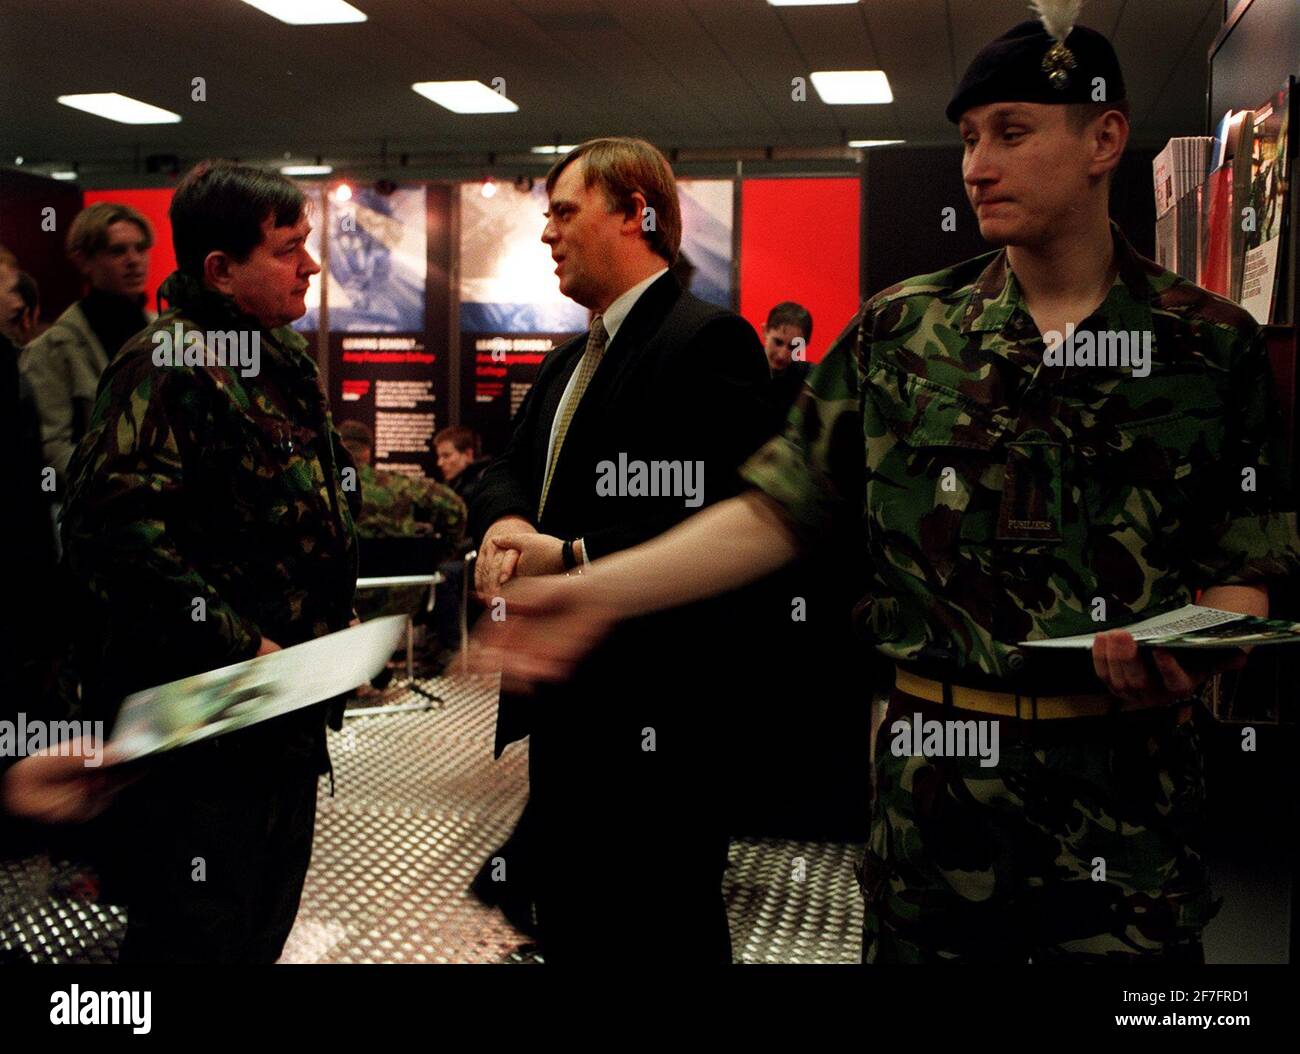 ANDREW SMITH MP VISITS THE ARMY RECRUITMENT STALL AT THE GRADUATE RECRUITMENT FAIR AT OLYMPIA, THE ARMY CURRENTLY HAS 15,000 VACANCIES TO FILL. Stock Photo